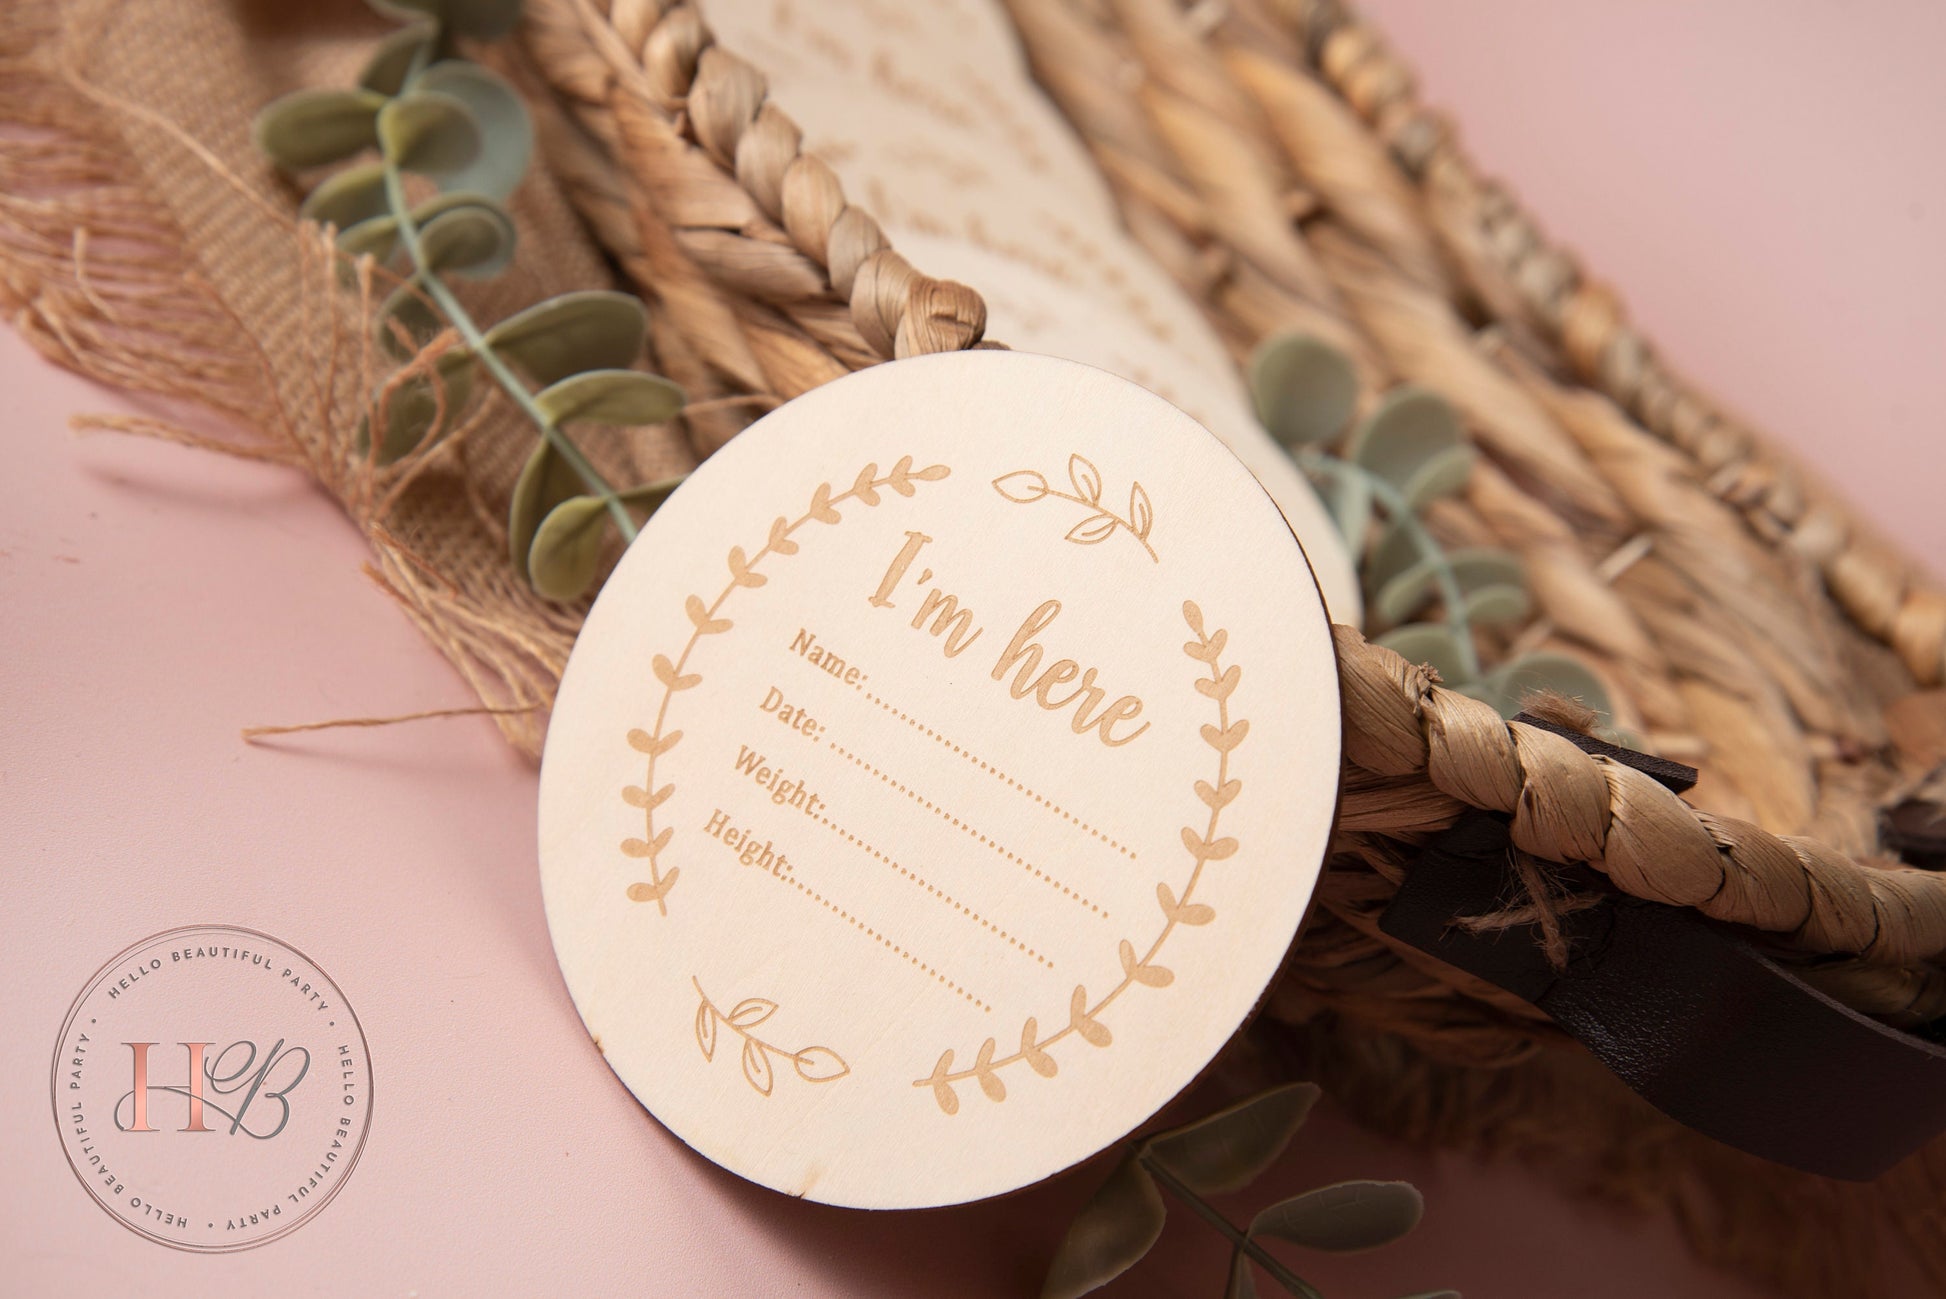 I'm Here Disc, Baby shower gift, Photo prop plaque, baby announcement disc, birth announcement disc, wooden discs